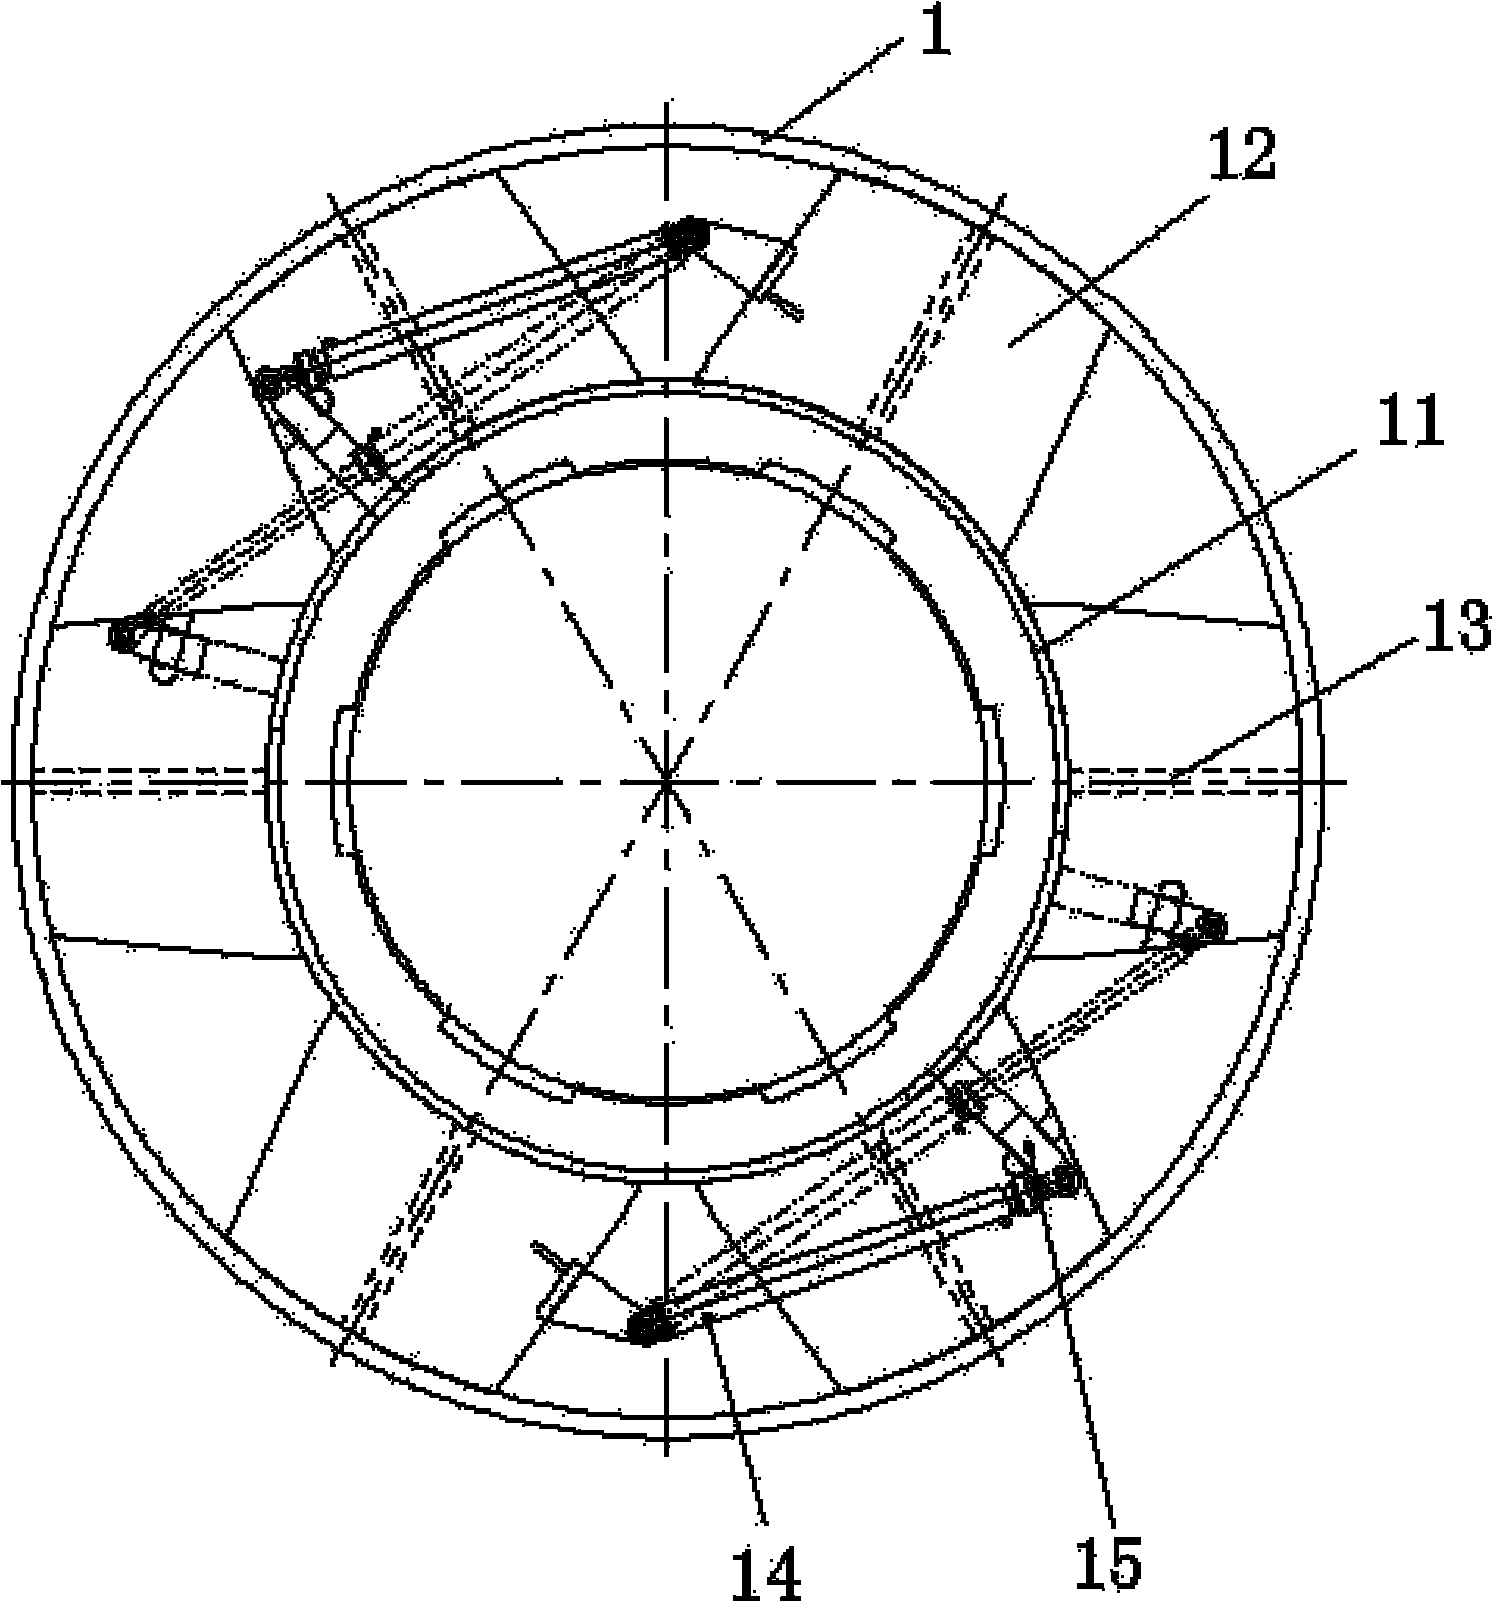 Continuous stepping hydraulic lifting device and method